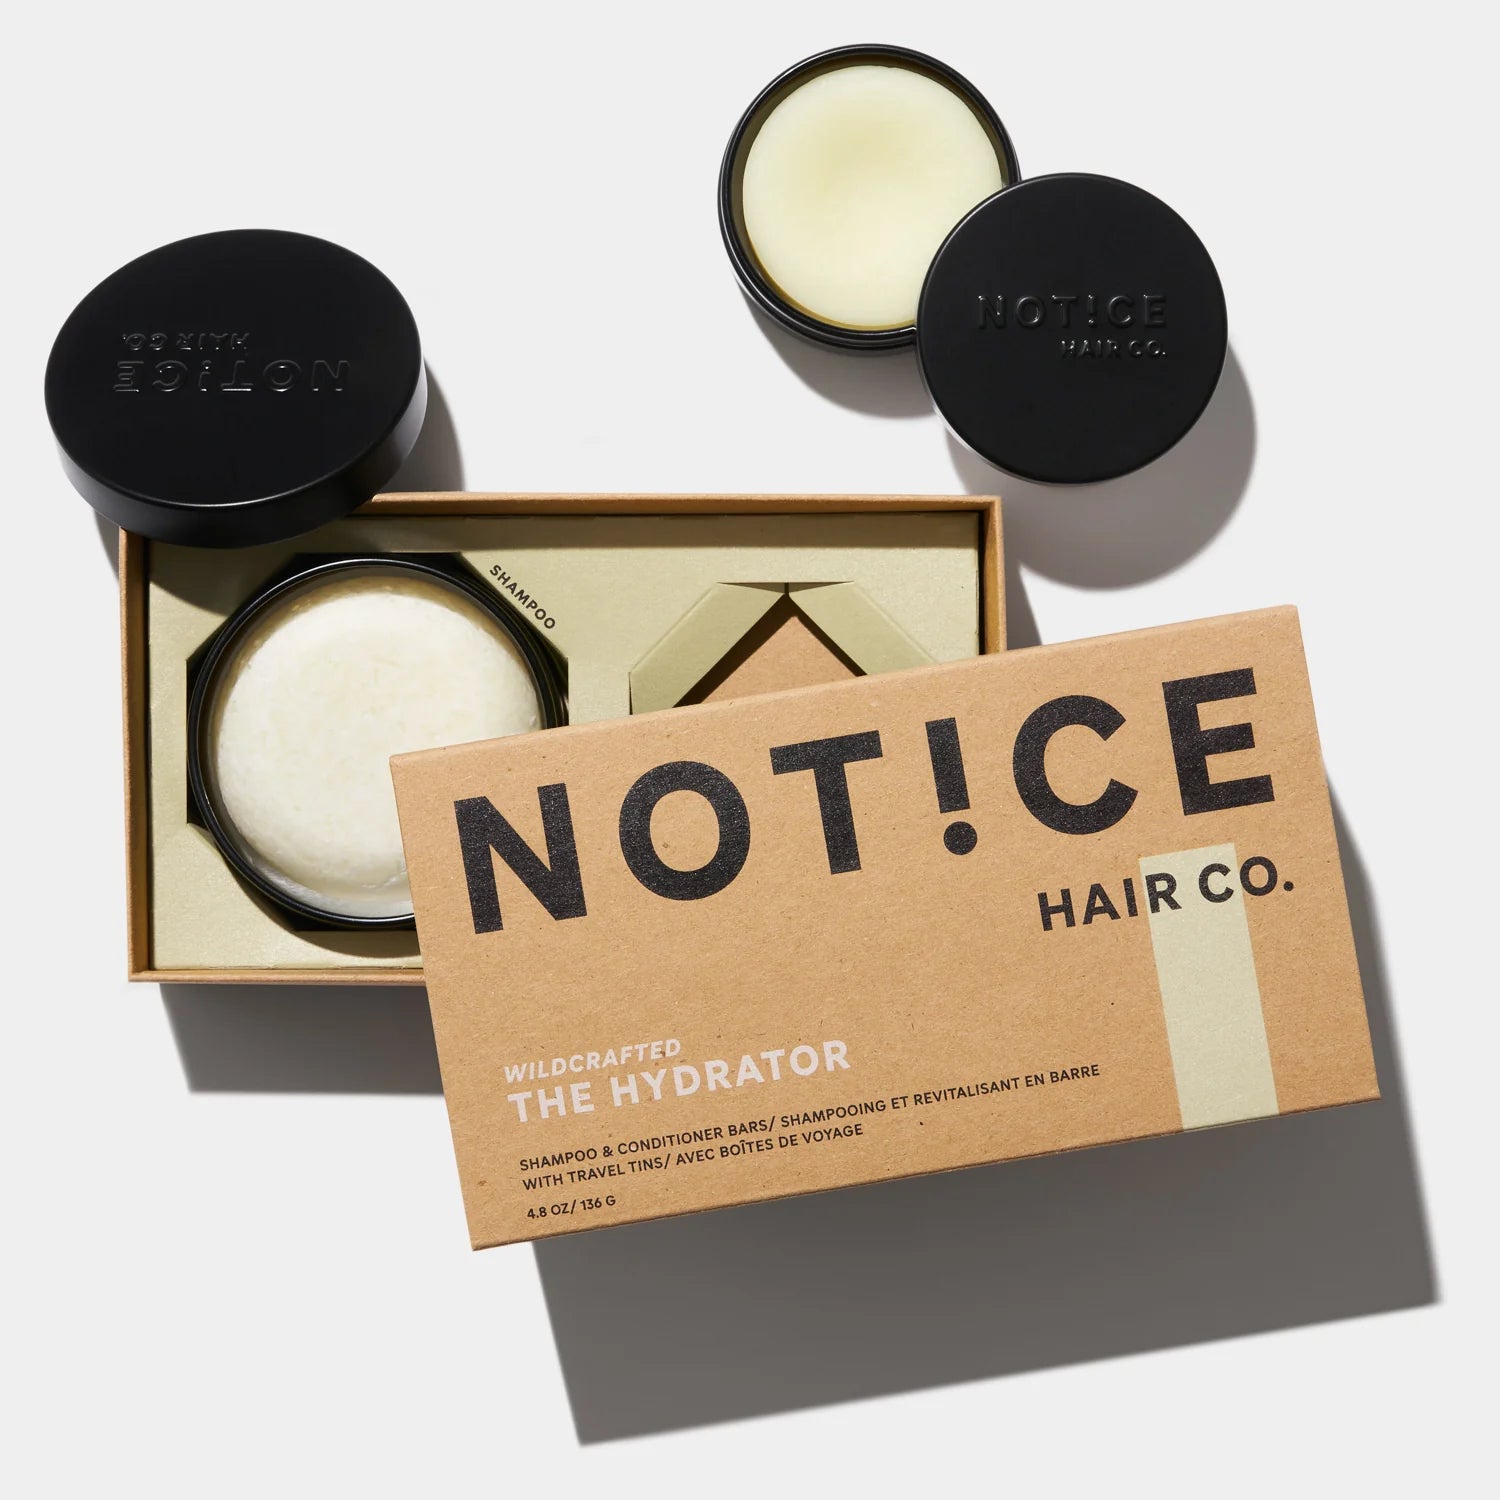 Sustainable packaging example from brand Notice Hair Co.